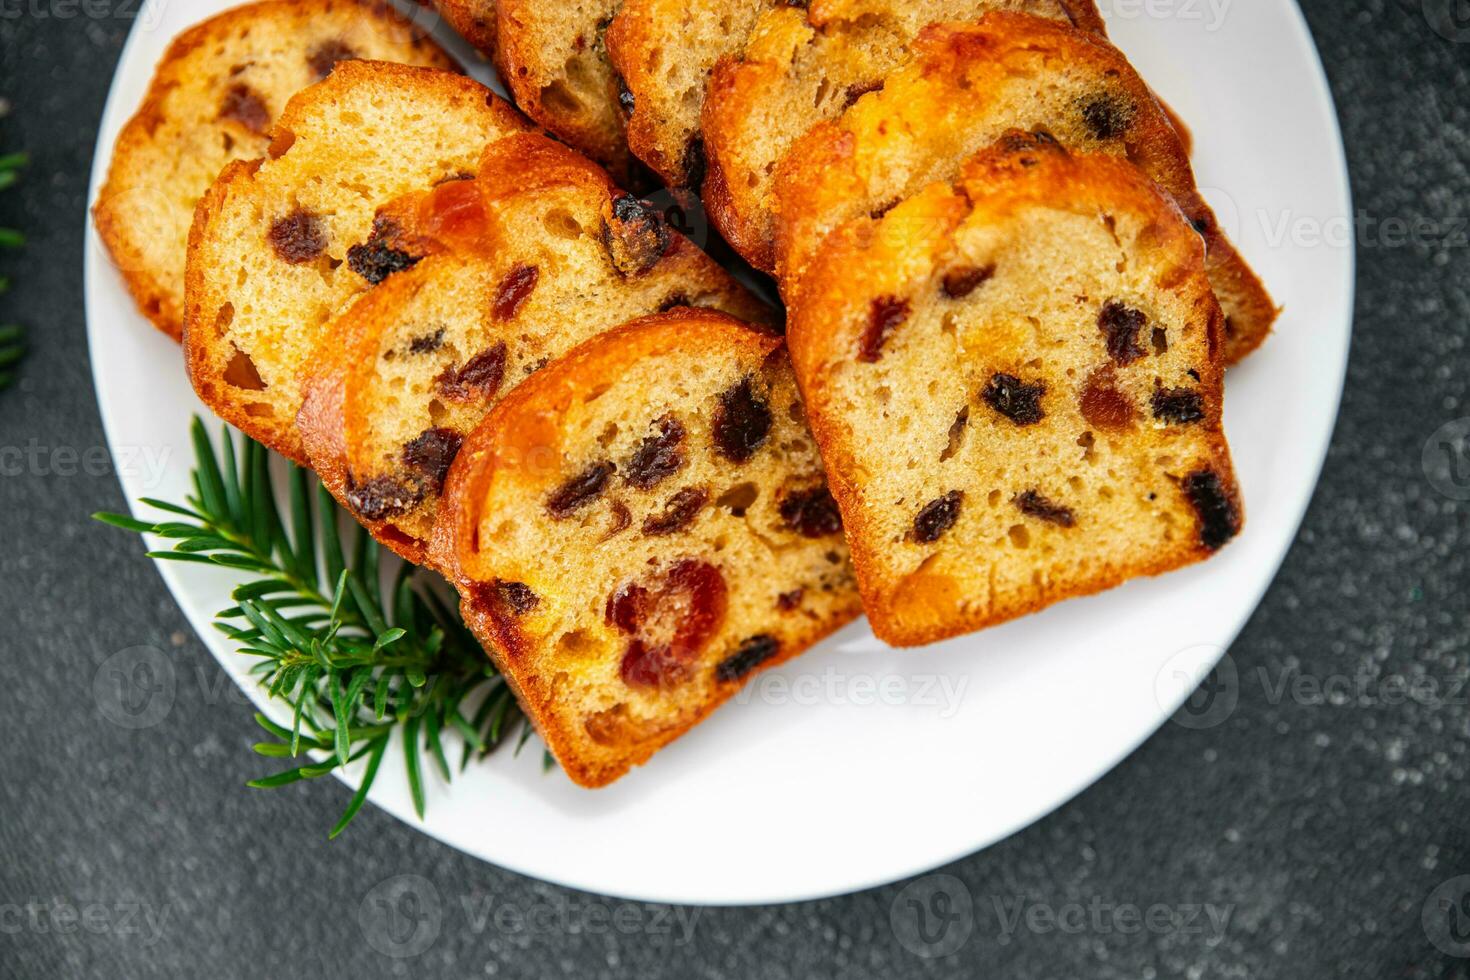 fruit cake pastry dried fruits cherries, dried apricots, prunes, raisins sweet Christmas sweet dessert holiday treat new year and christmas meal food snack on the table copy space food background photo